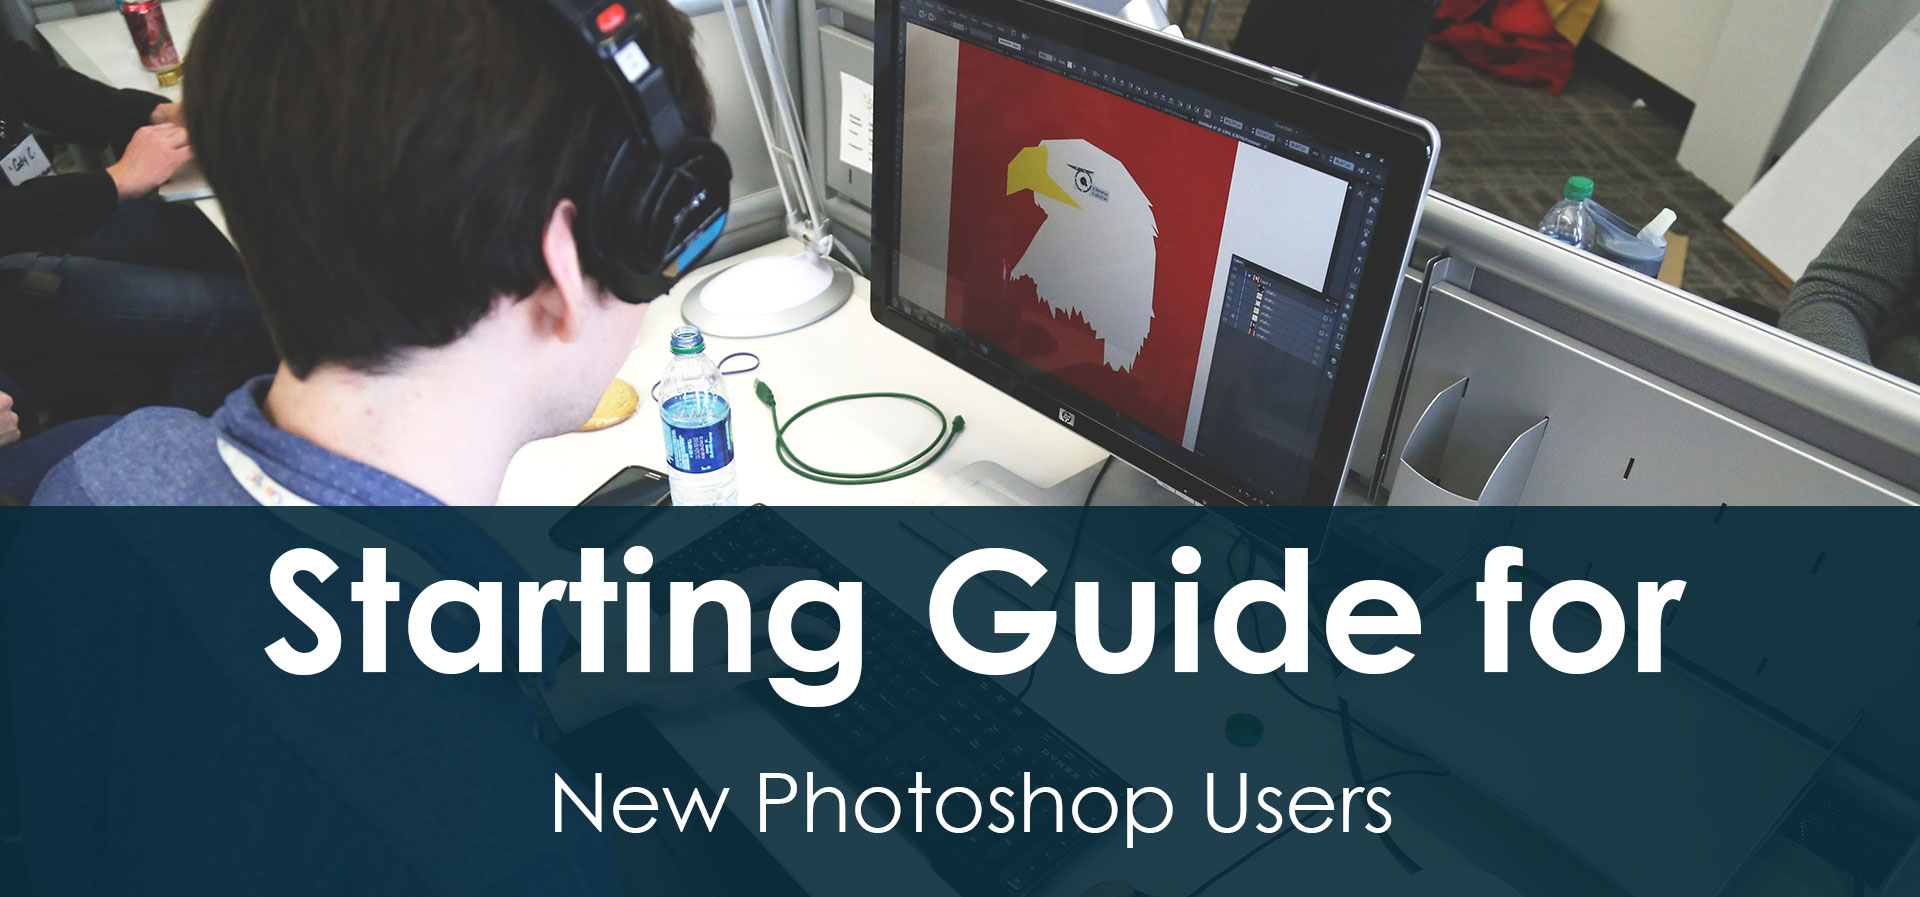 adobe photoshop 7.0 users guide